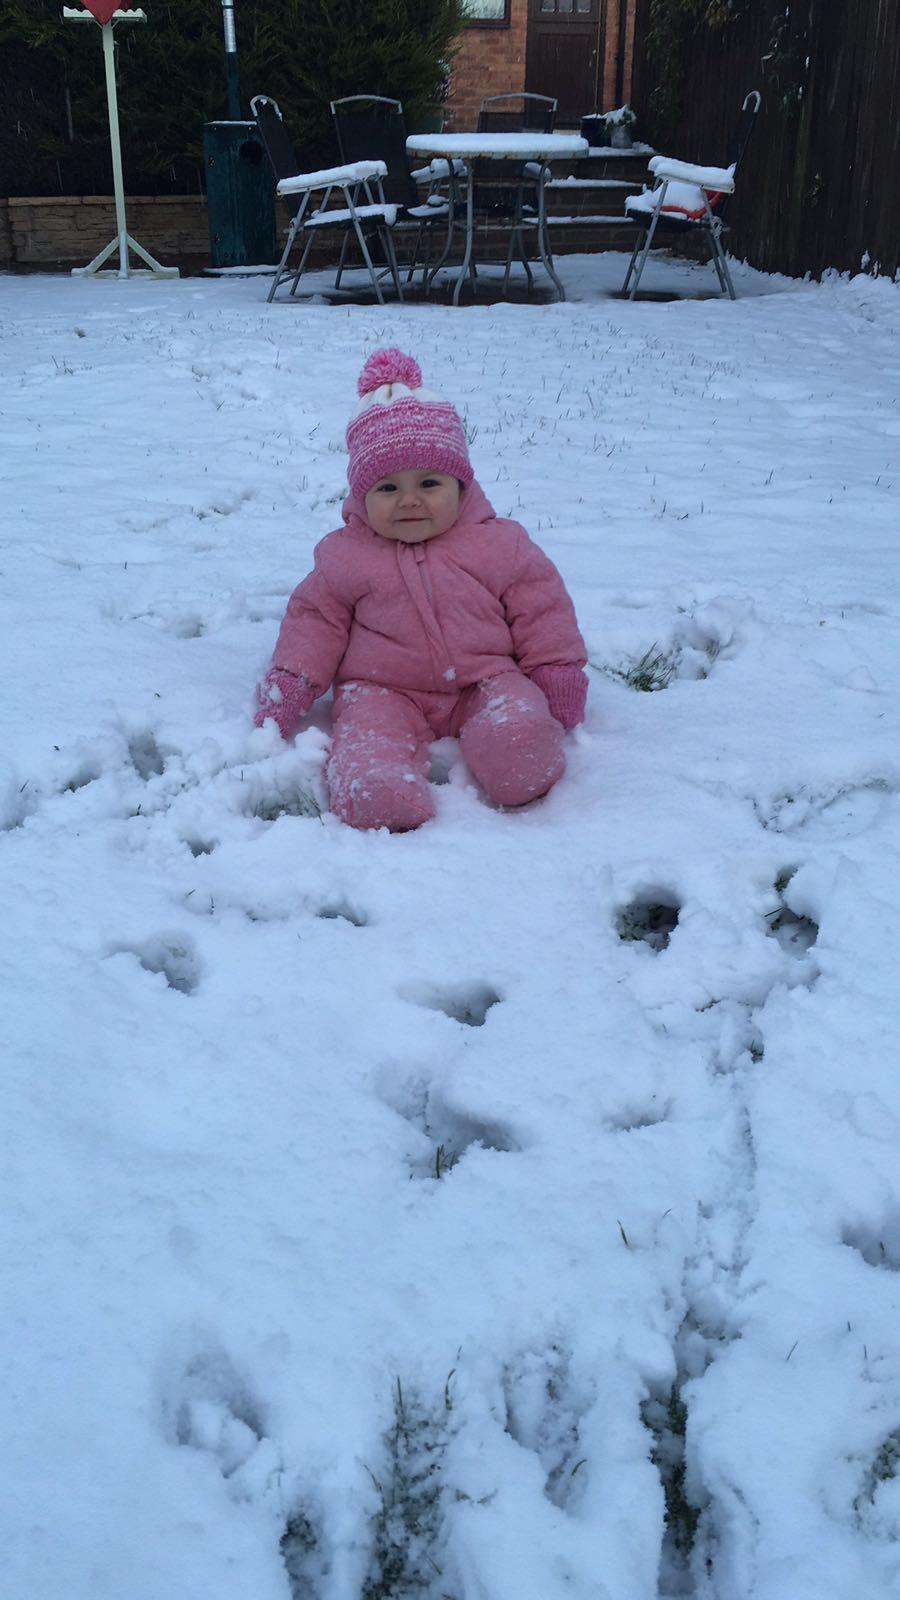 10-month old Francesa Vasey enjoys her first experience of snow in Scarborough.